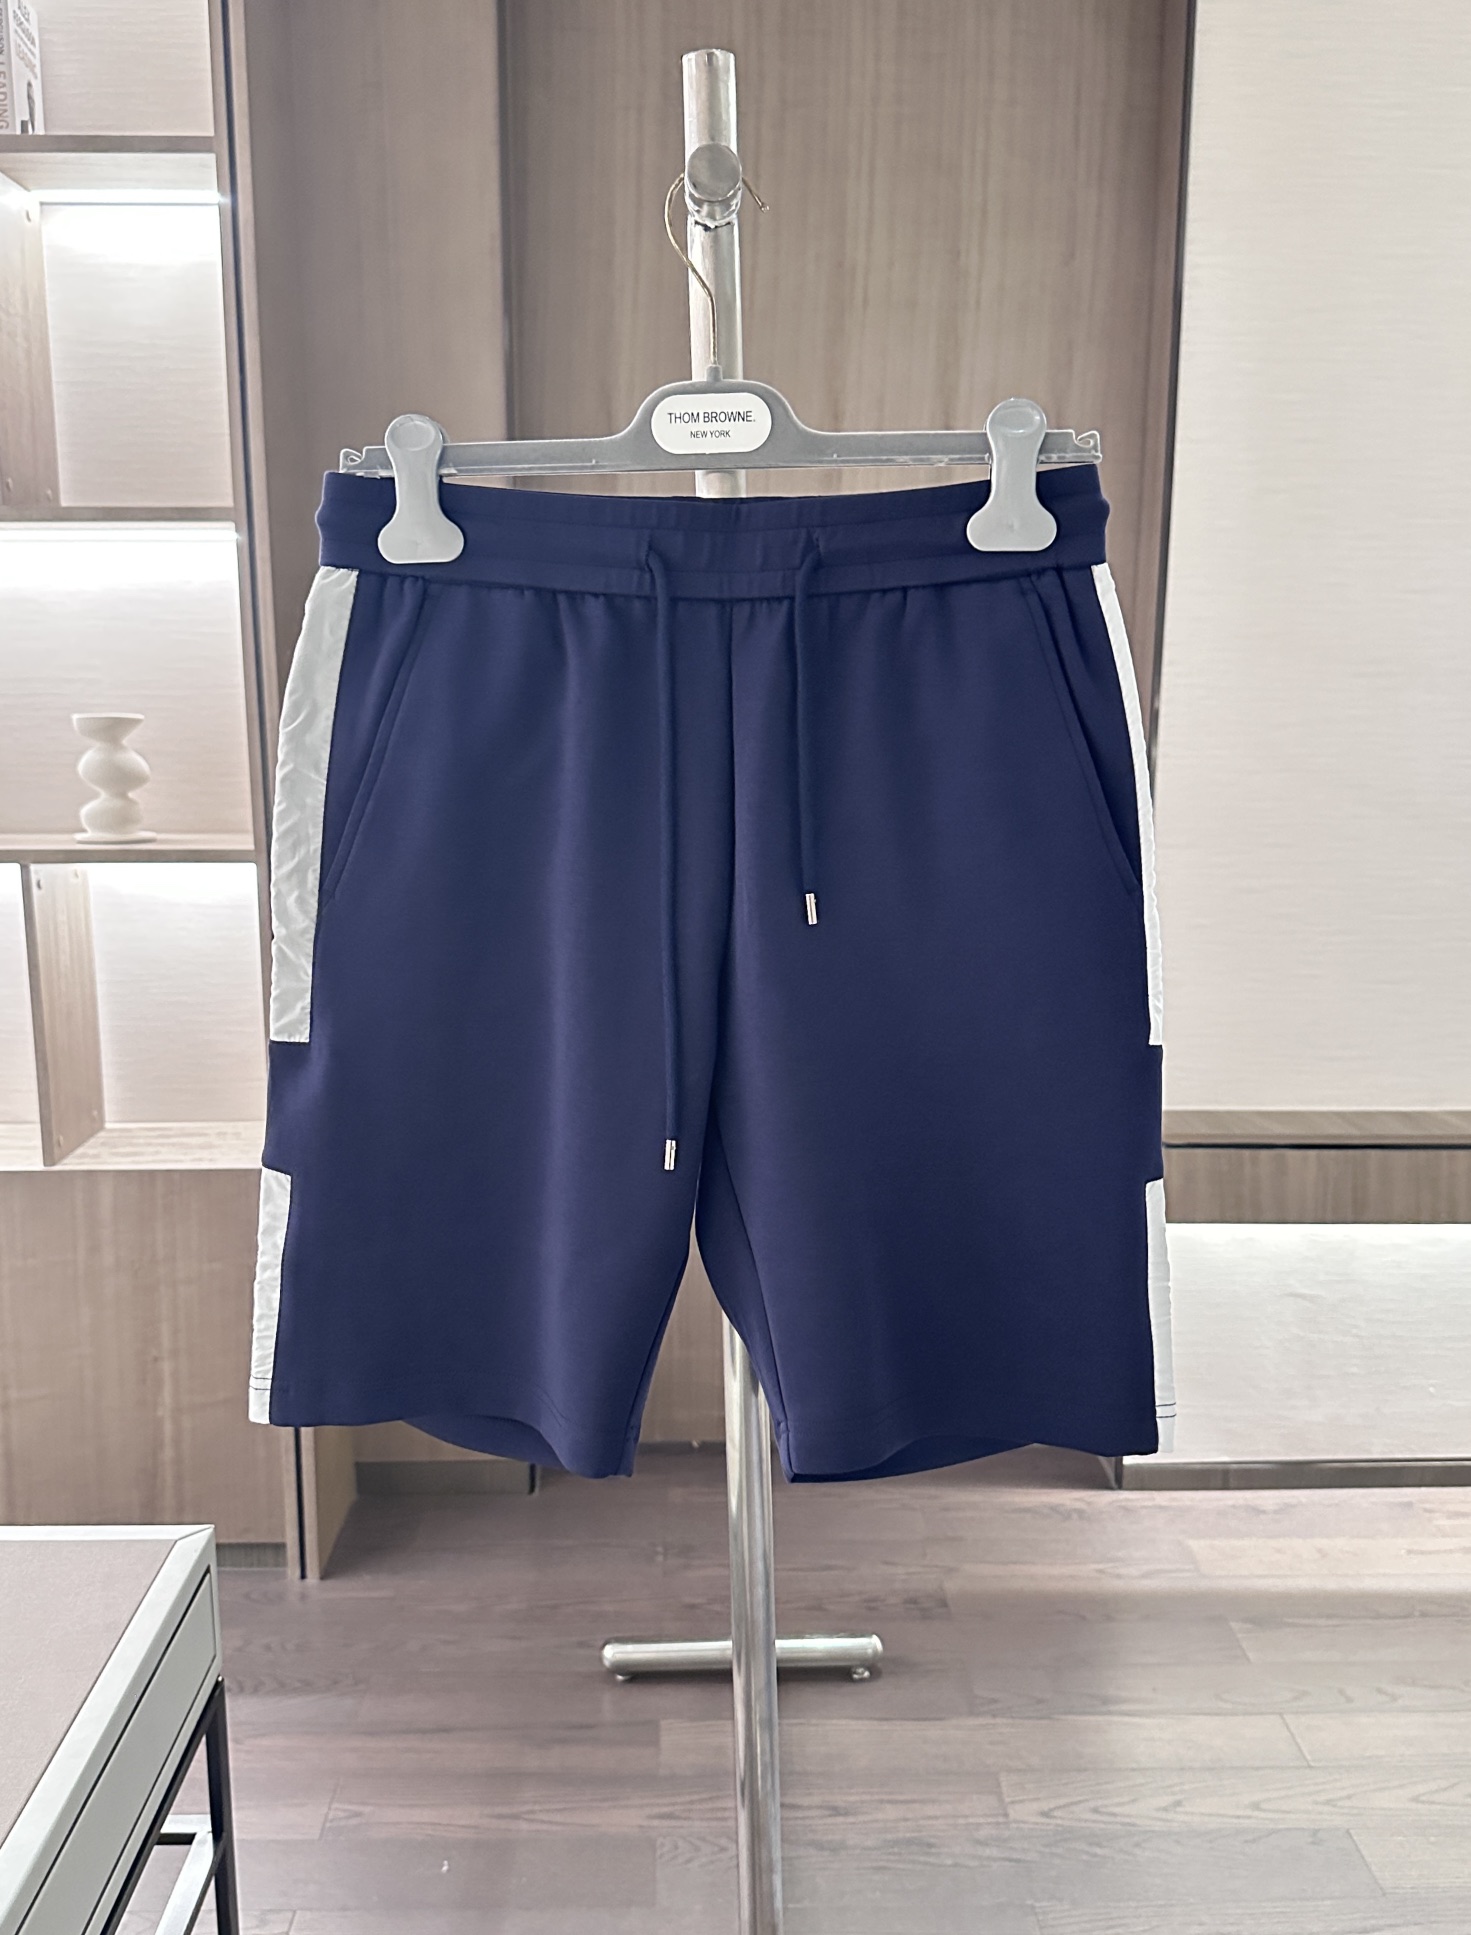 Hermes Clothing Shorts Splicing Summer Collection